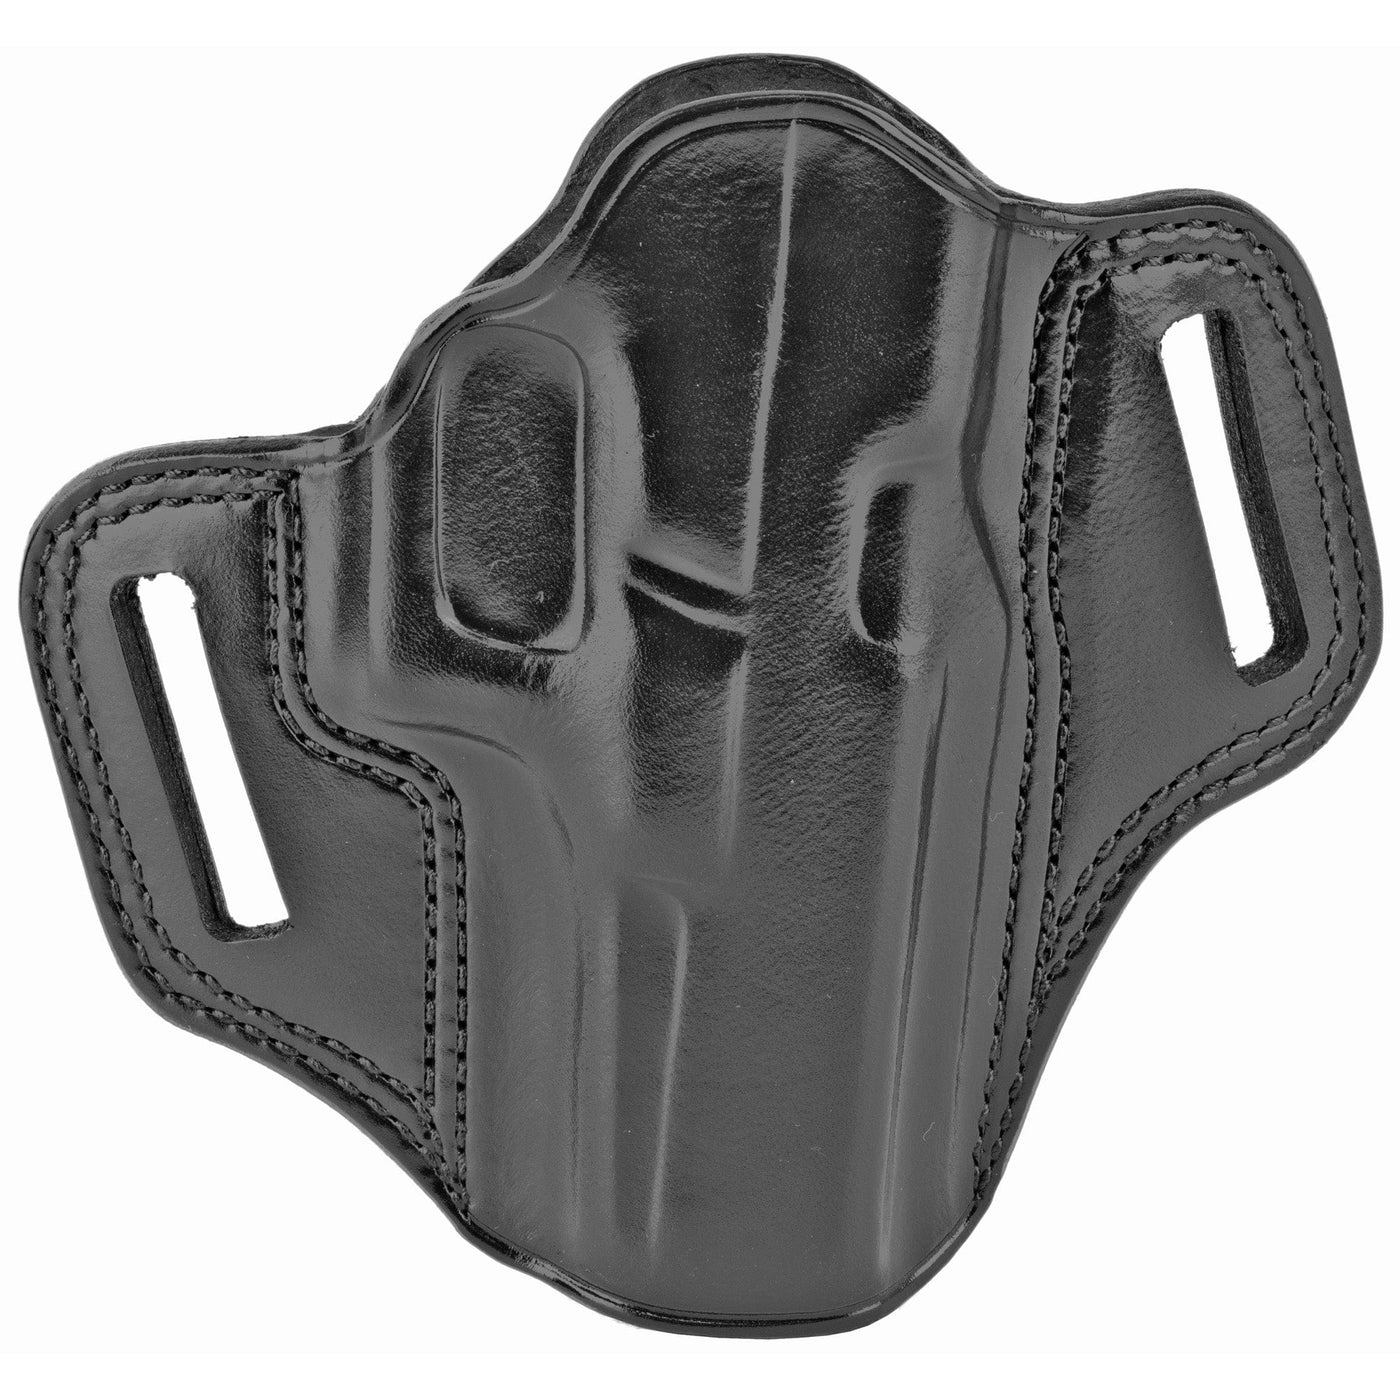 Galco Galco Combat Master For G20 Rh Blk Holsters